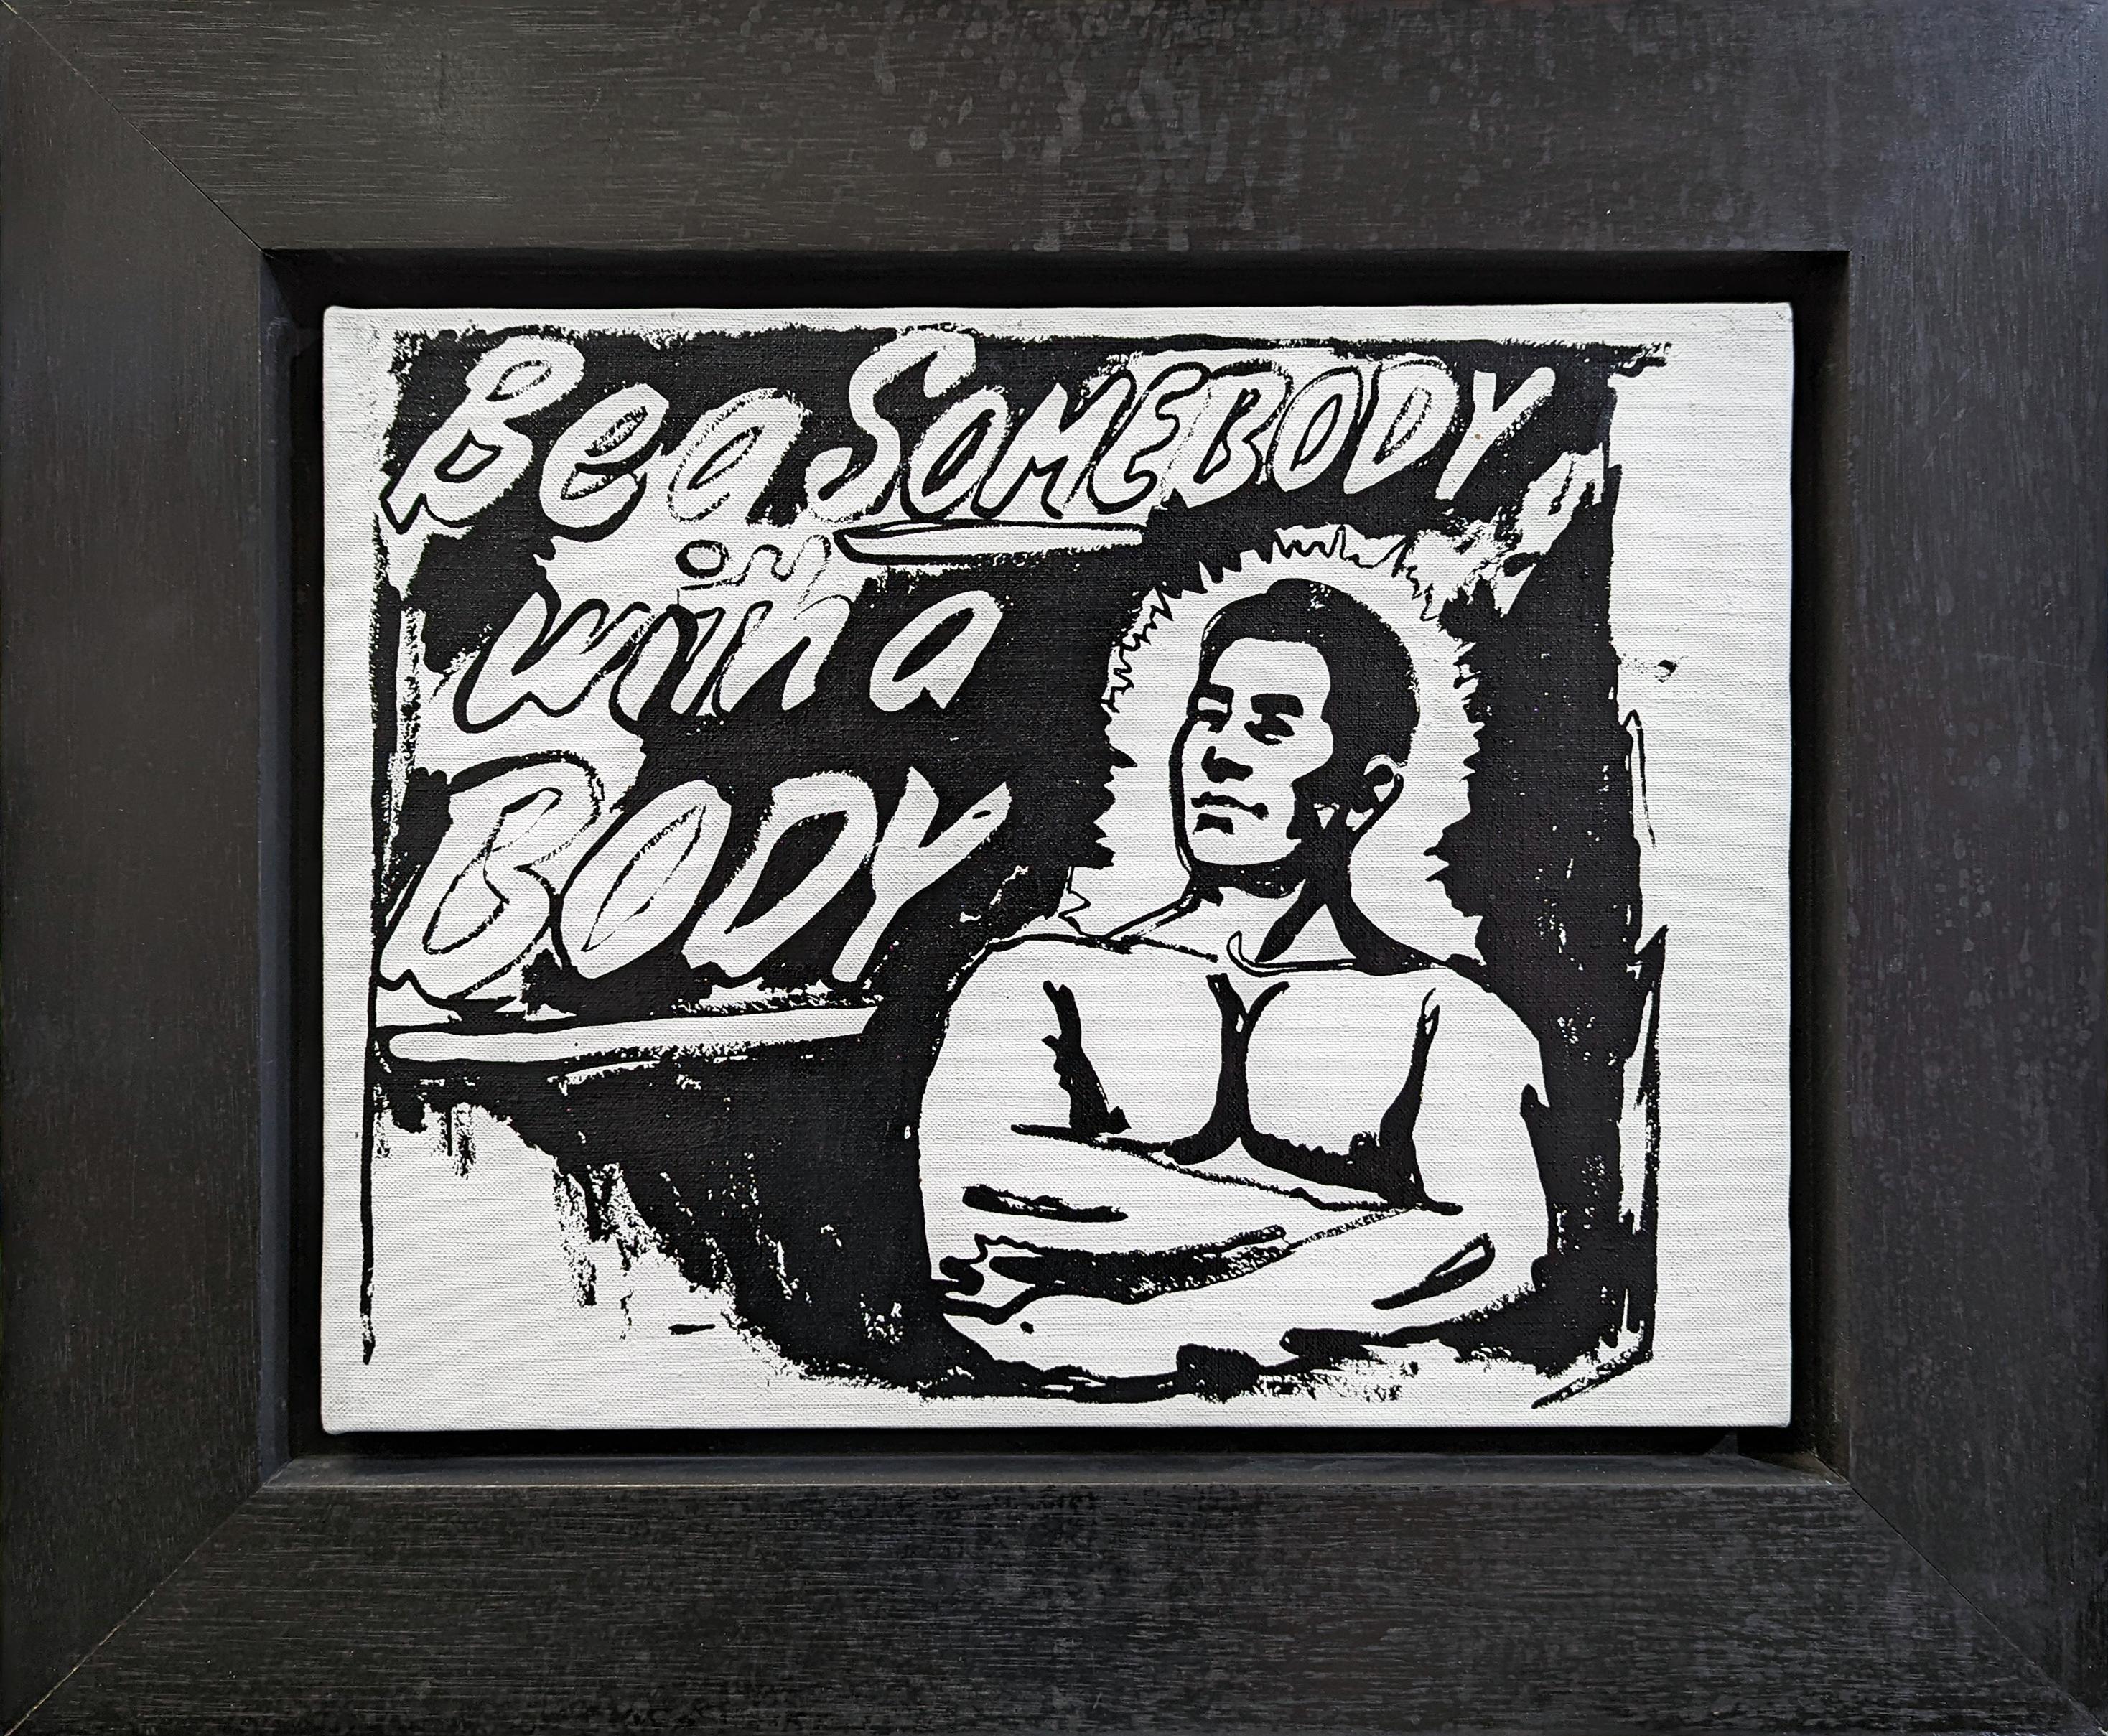 Andy Warhol Portrait Painting - BE A SOMEBODY WITH A BODY (UNIQUE)